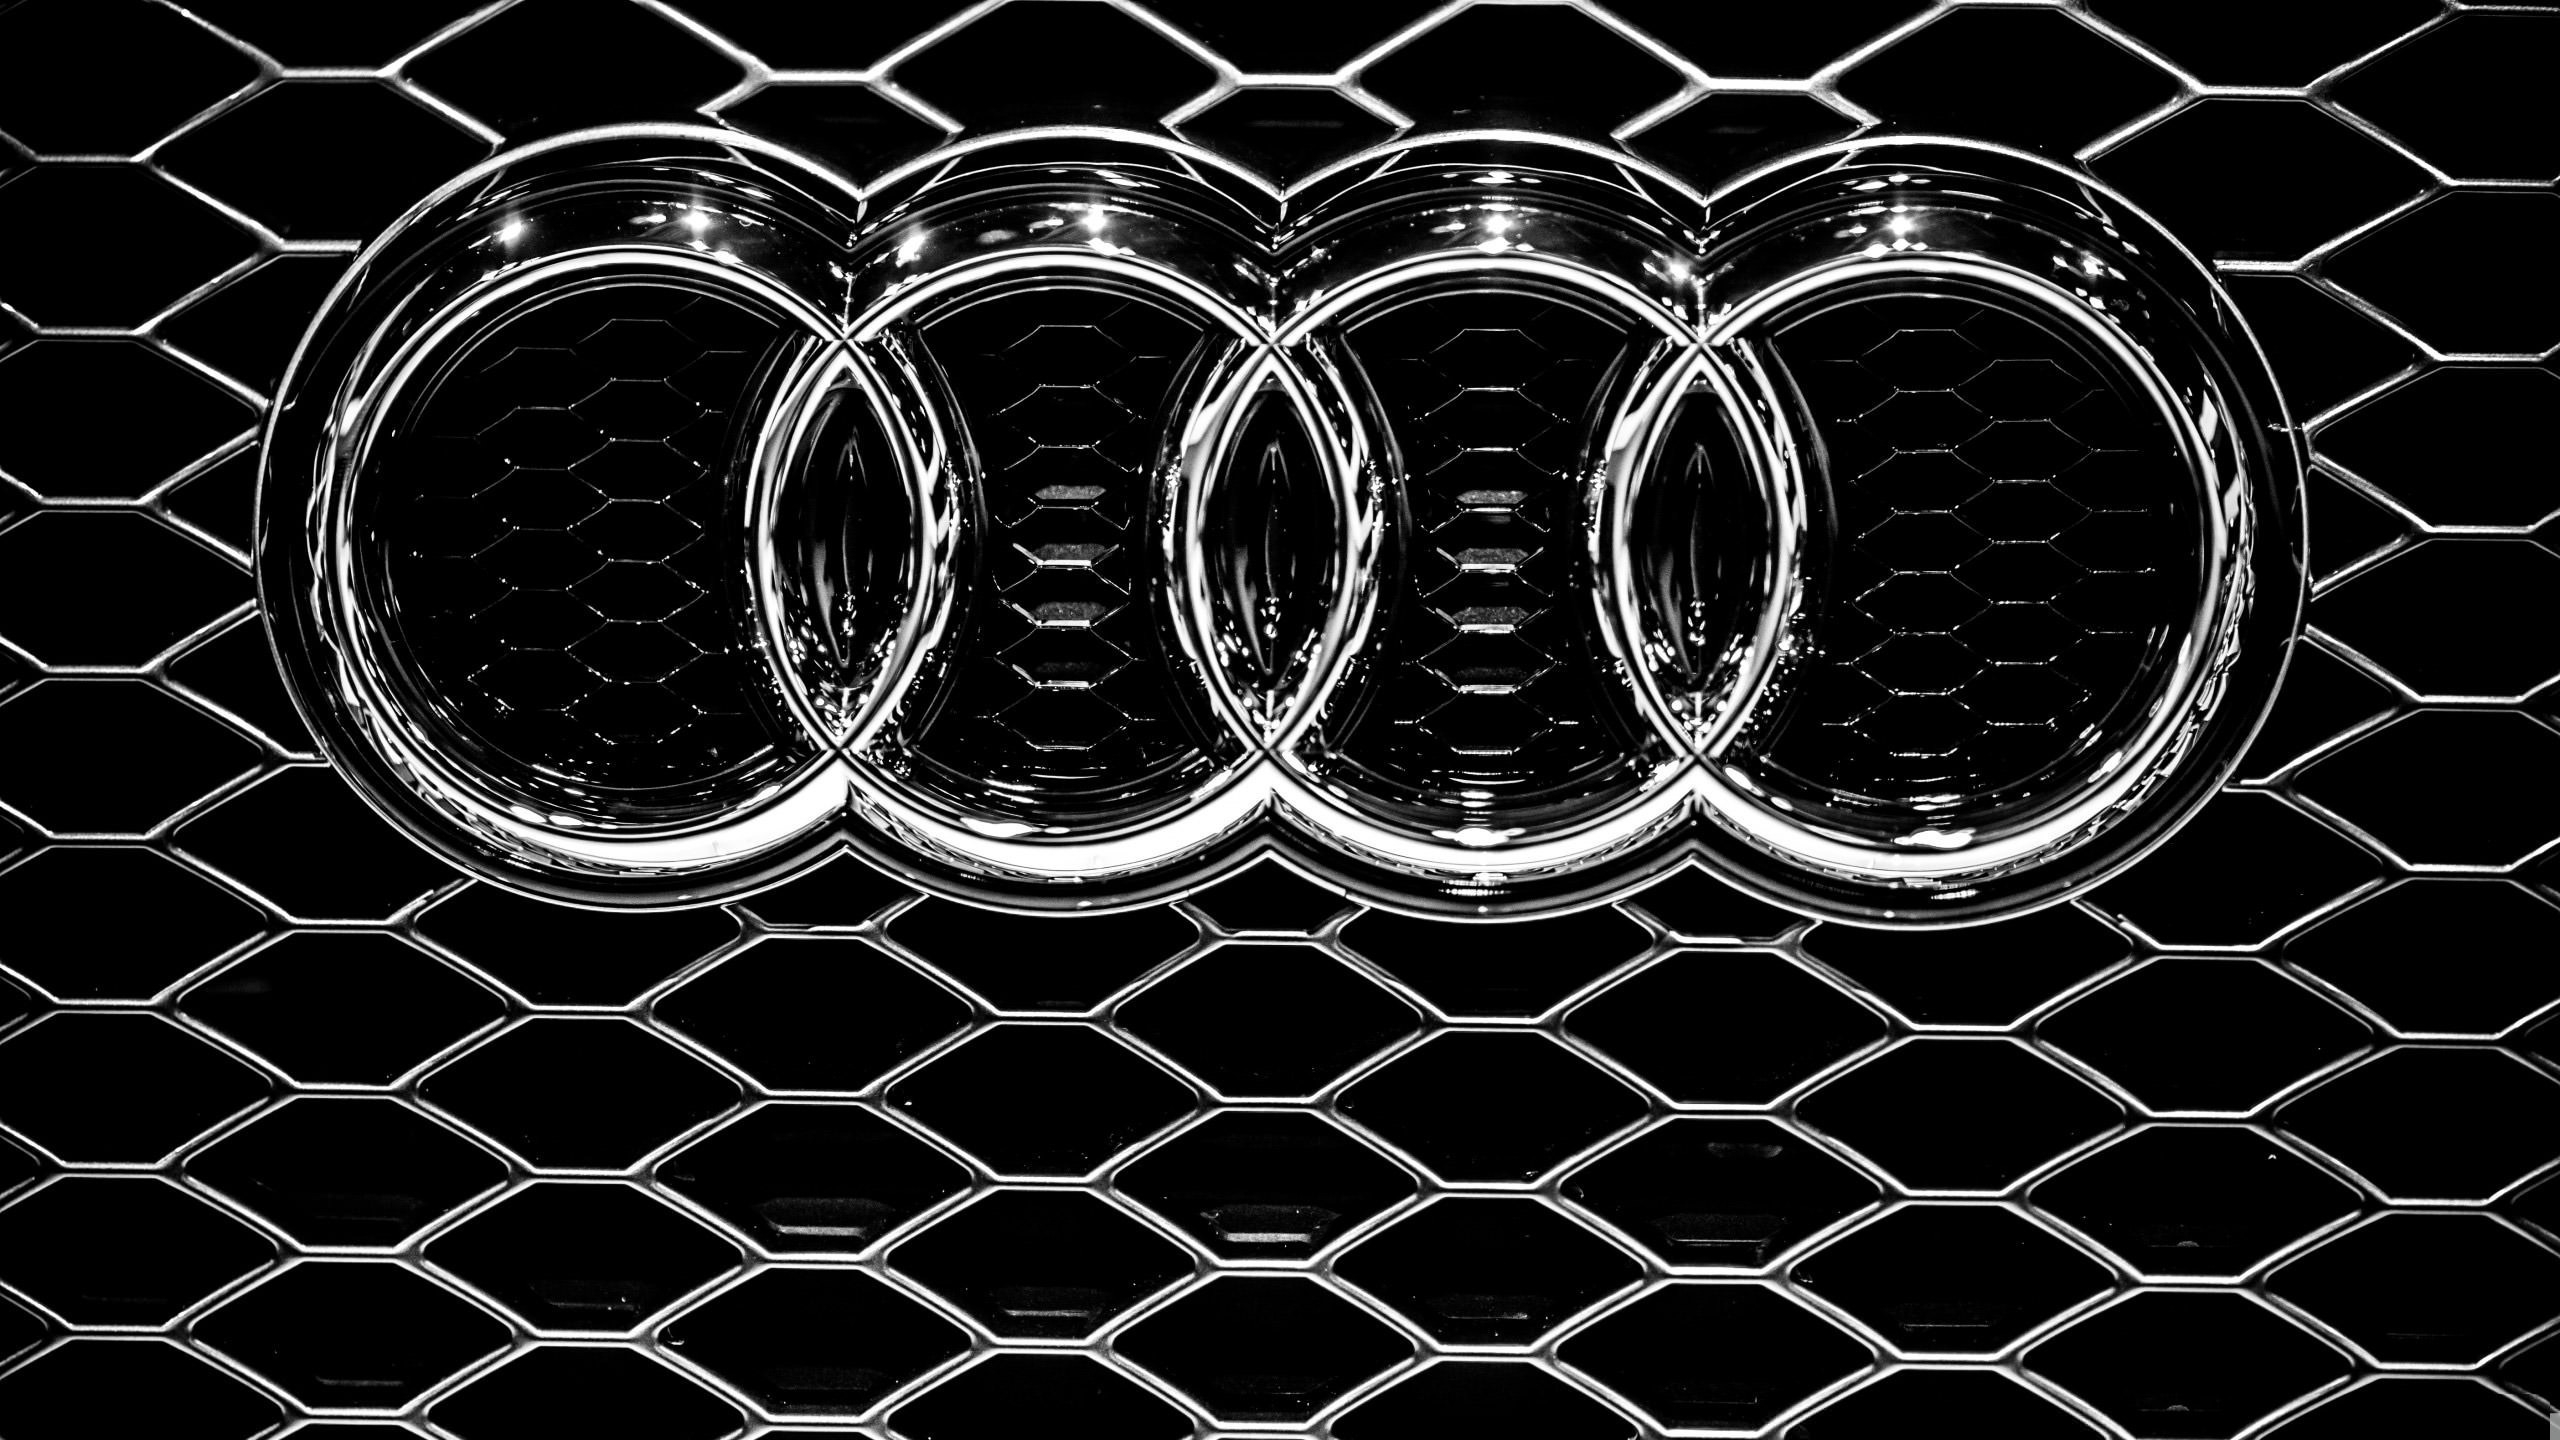 Audi Grille for 2560x1440 HDTV resolution